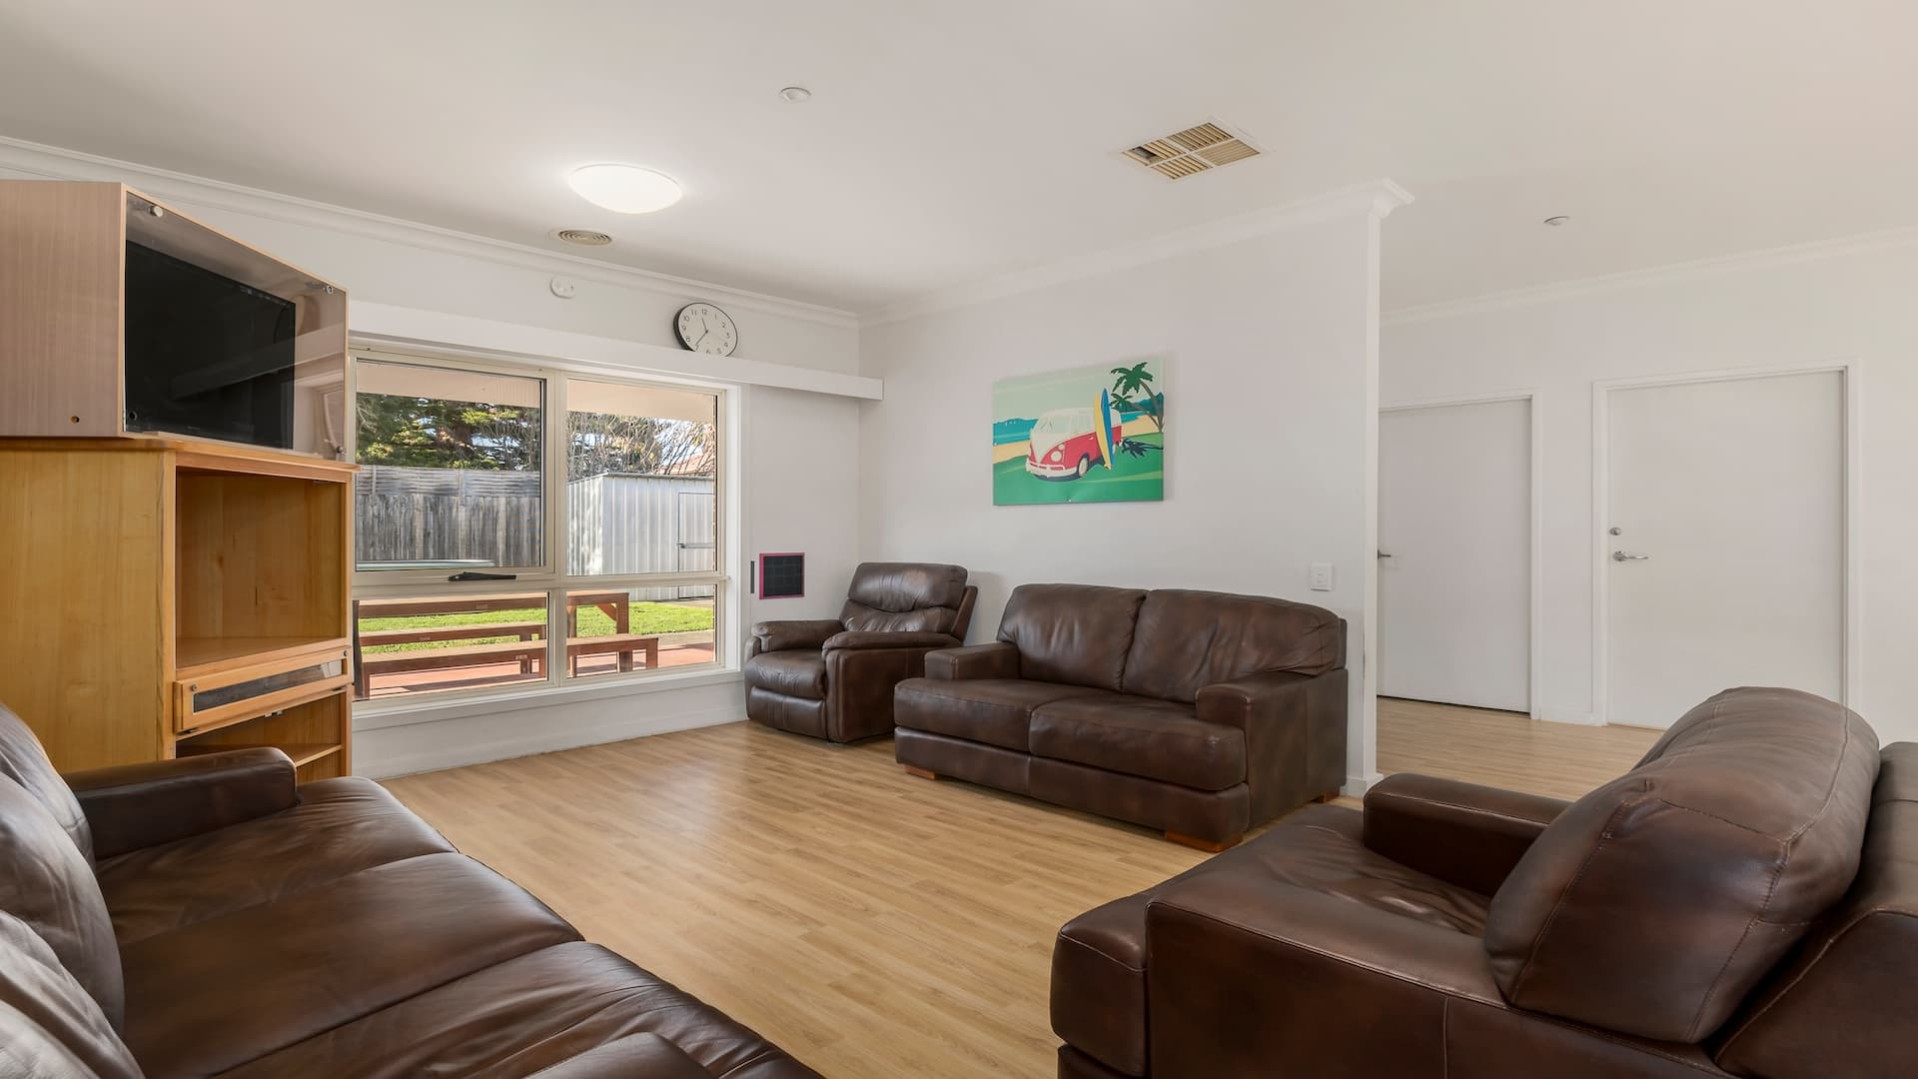 Spacious lounge room with large window, hard wood flooring, two brown leather sofas and two lounge chairs.